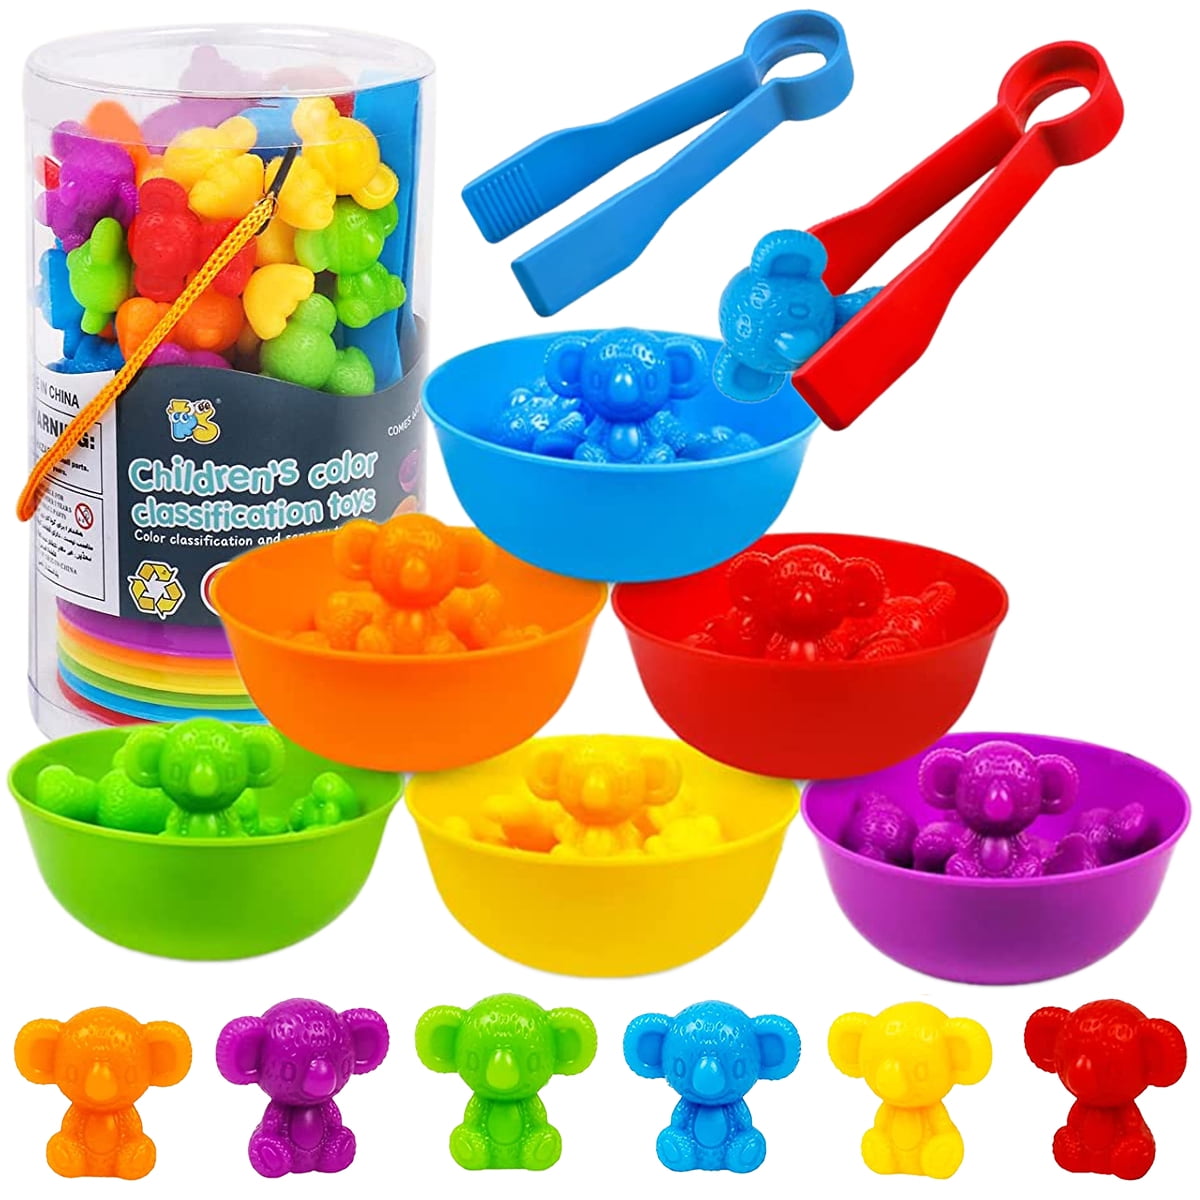 Qenwkxz 56pcs Educational Toys for Toddlers Age 12 months 1 2 3 4